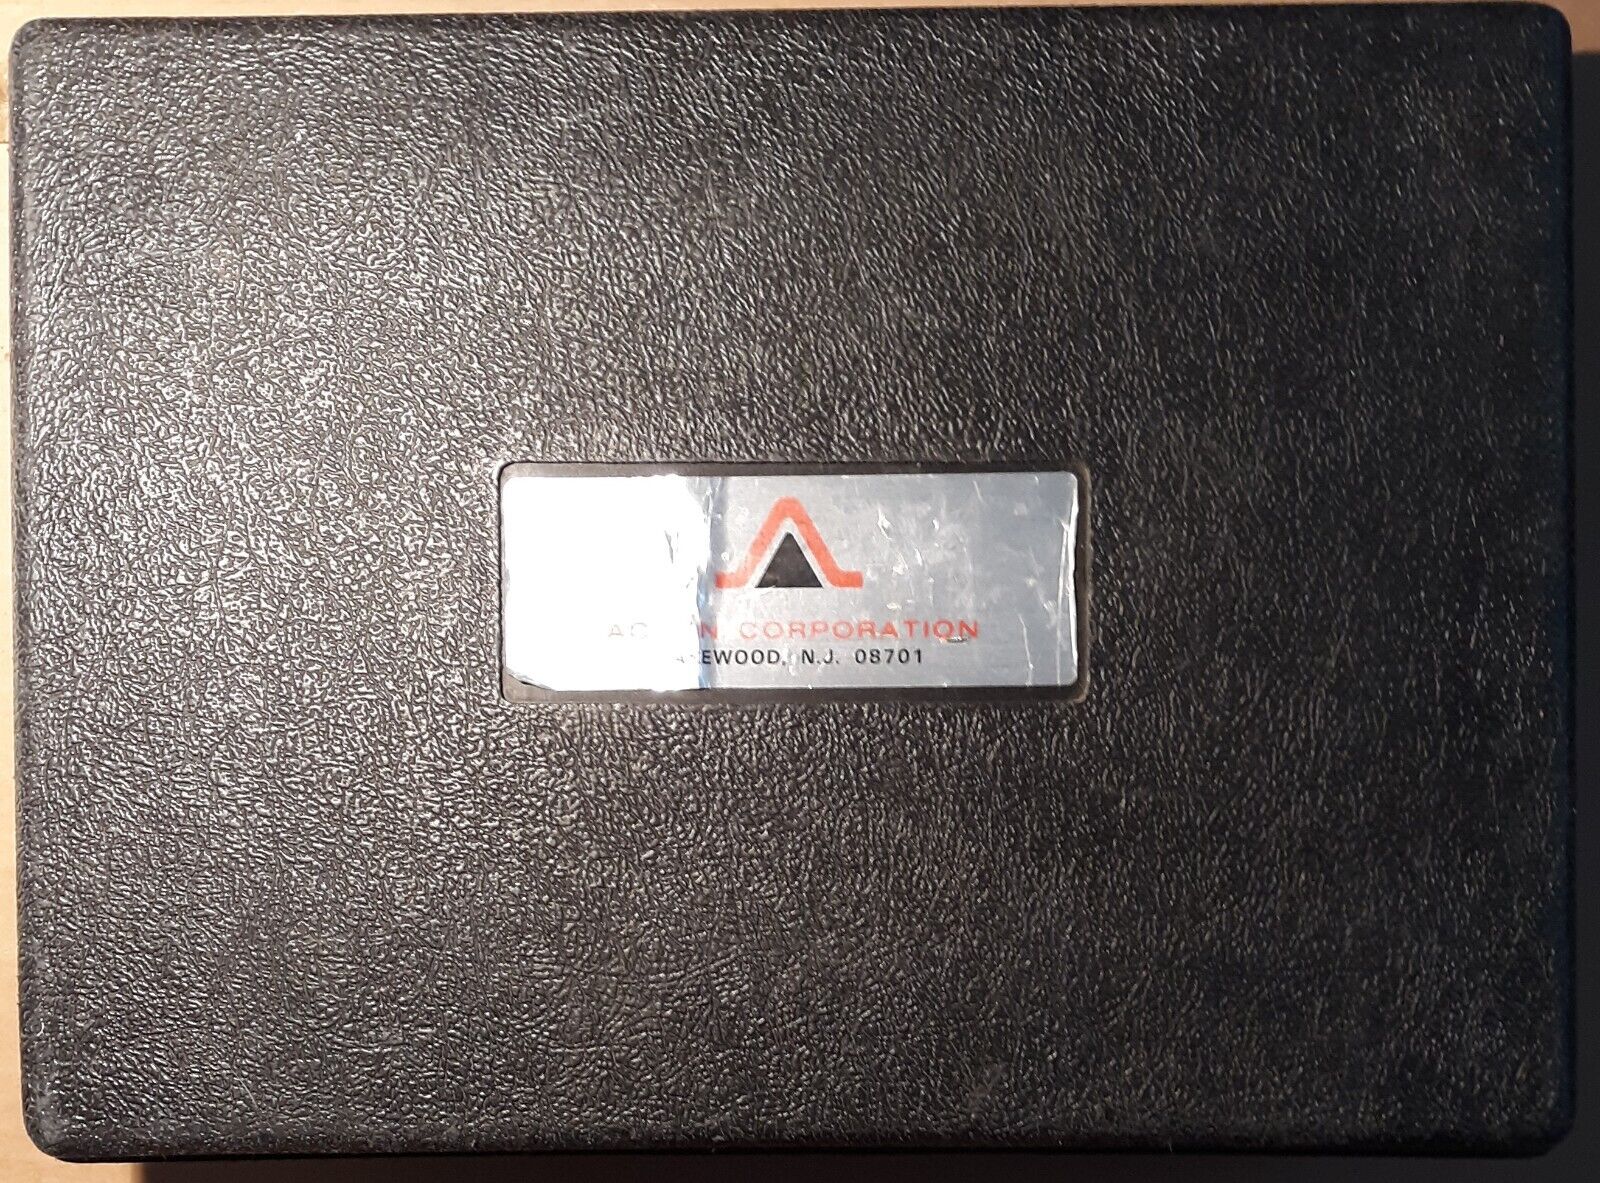 Acron DD-1PC Chip programmer for Alarm systems (Vintage)